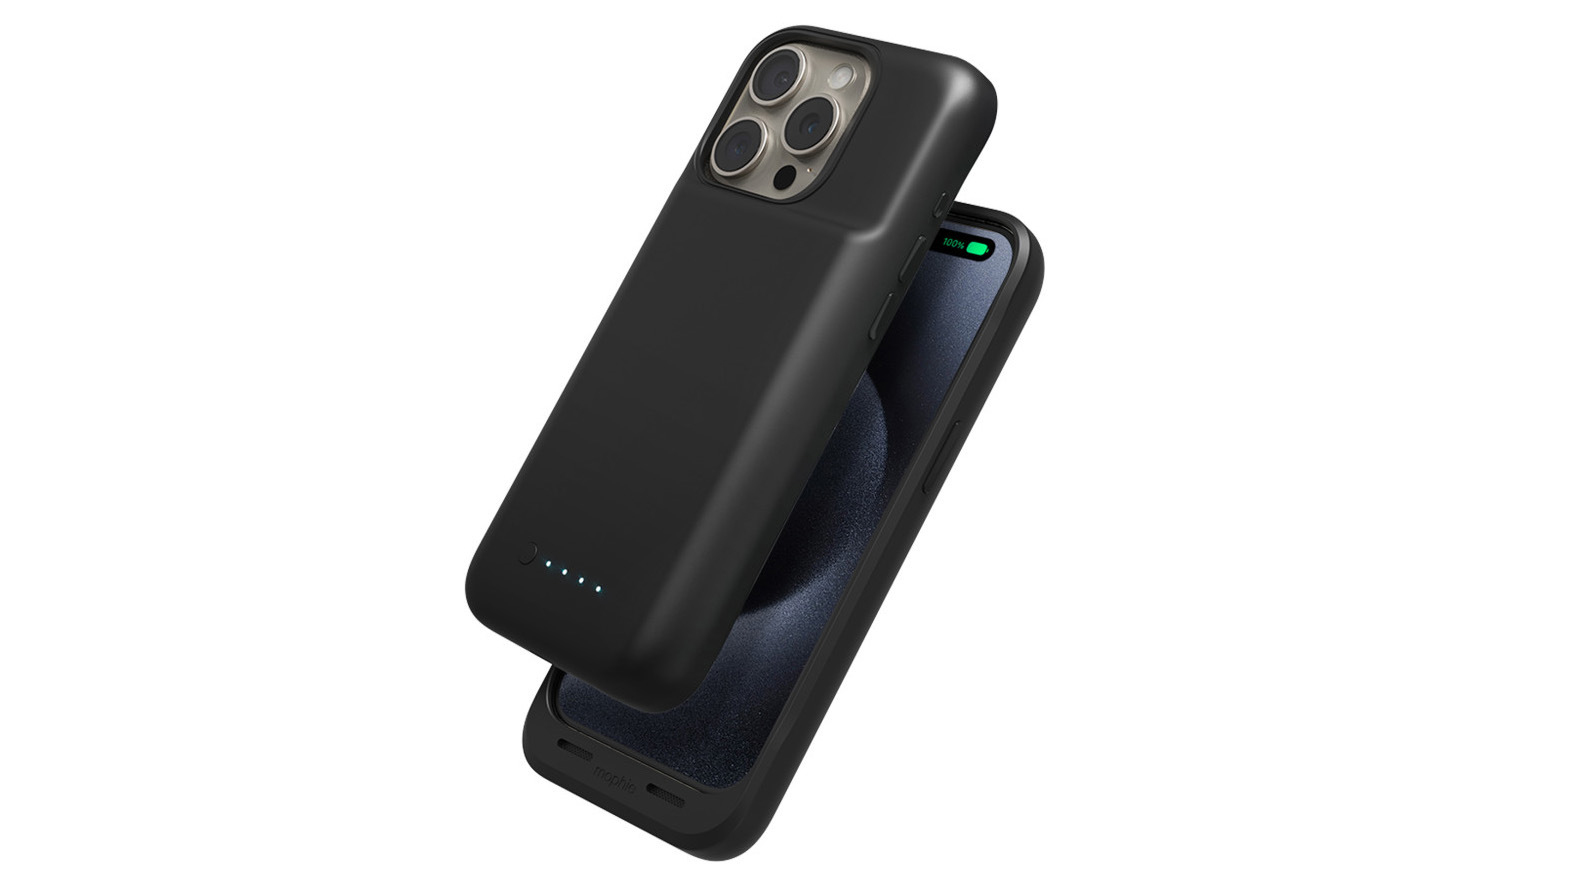 Mophie’s iconic iPhone Juice Pack battery case is back